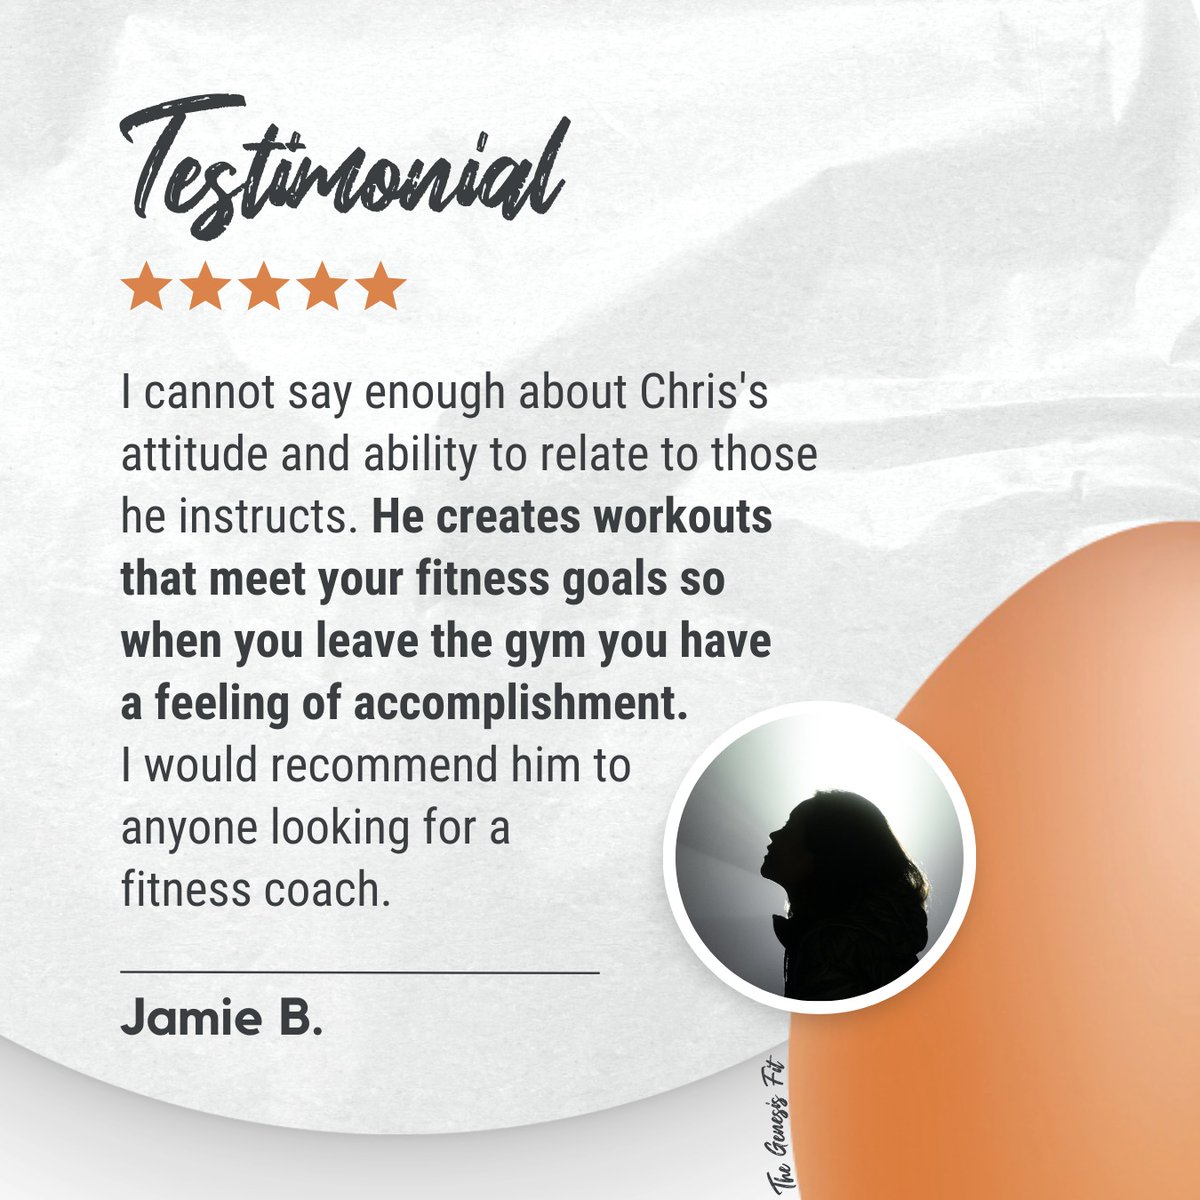 🌟 Thank You, Jamie B.! 🌟
Let's continue achieving those fitness milestones together, Jamie. Your dedication and positive attitude inspire us all! 
#ClientTestimonial #FitnessJourney #MarshfieldGym #SouthShoreMa #MarshfieldMa